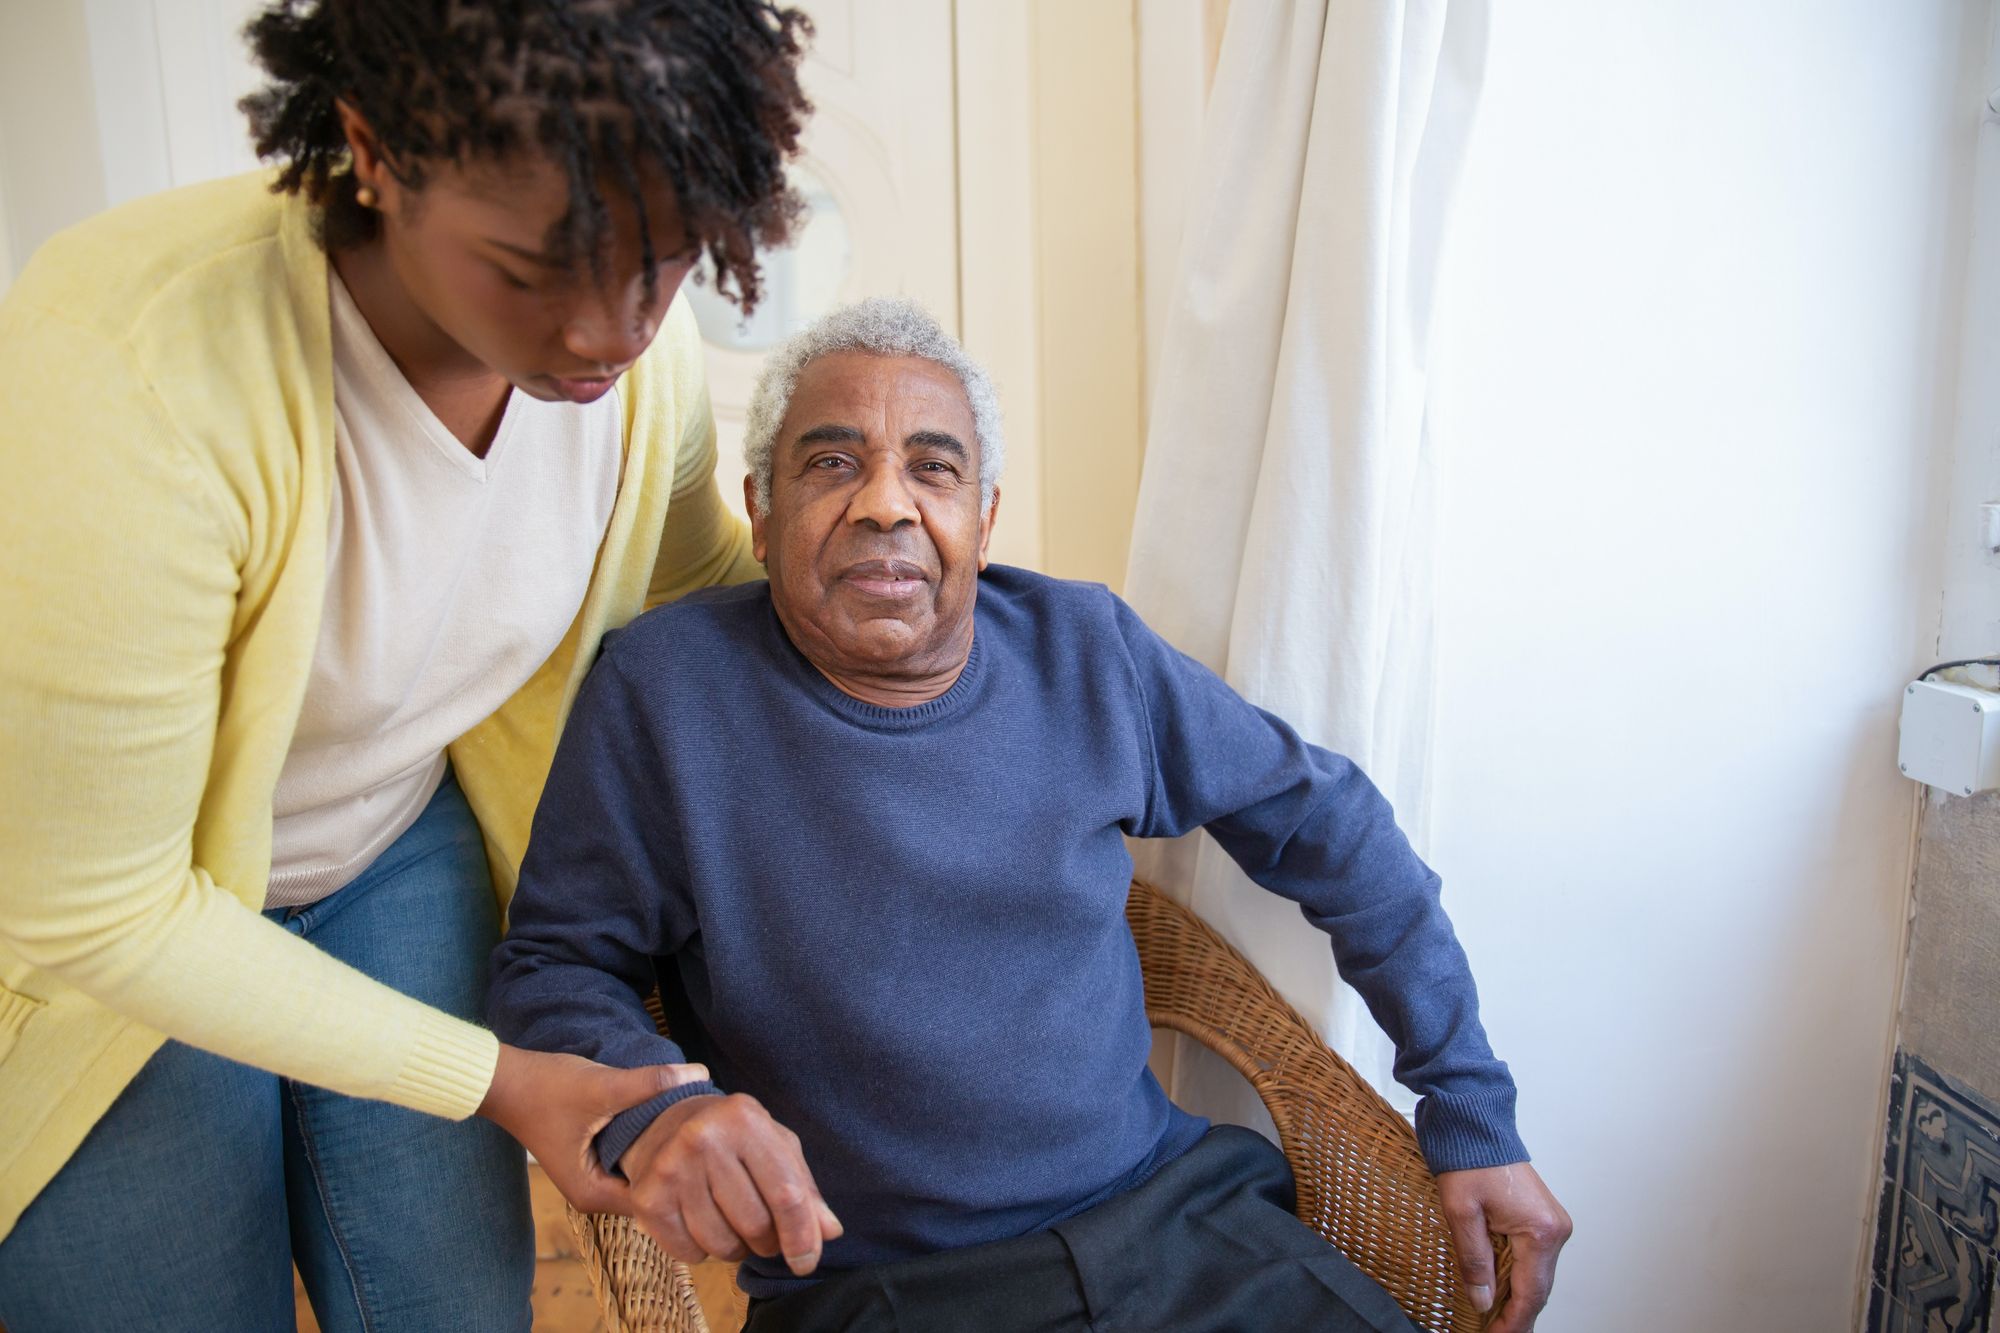 Strategies for Preventing Falls in Older Adults